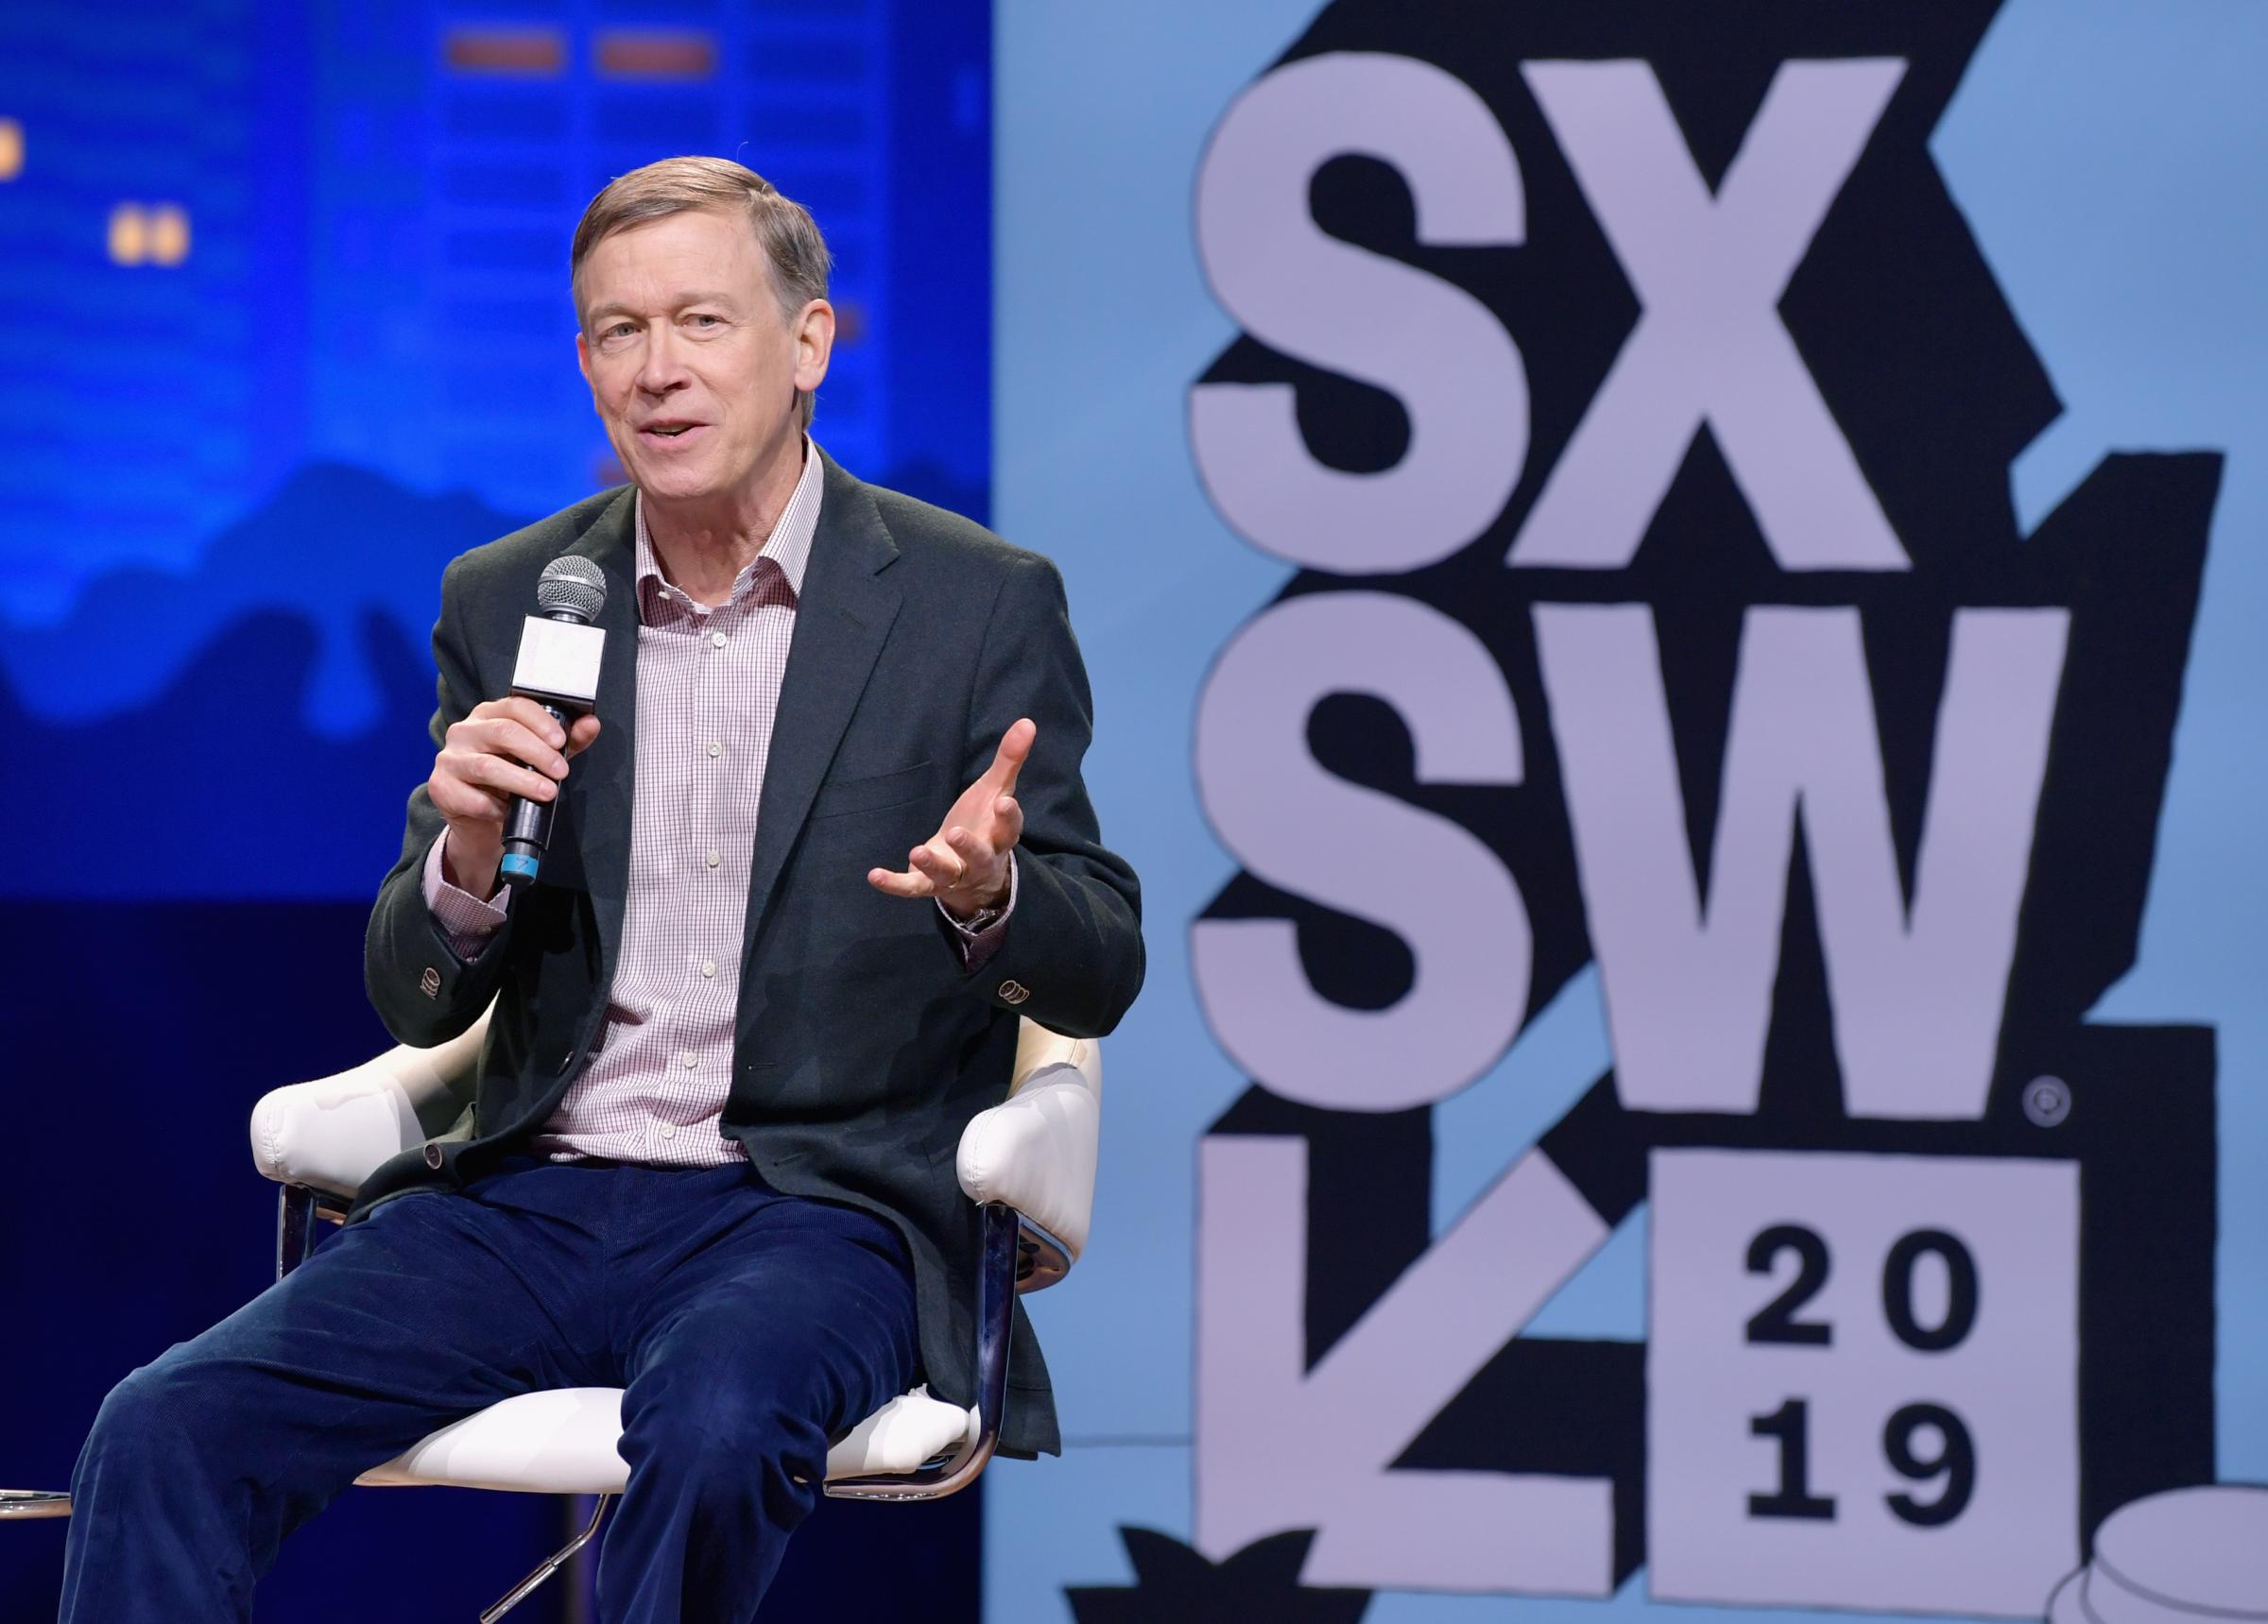 Conversations About America's Future: Former Governor John Hickenlooper - 2019 SXSW Conference and Festivals